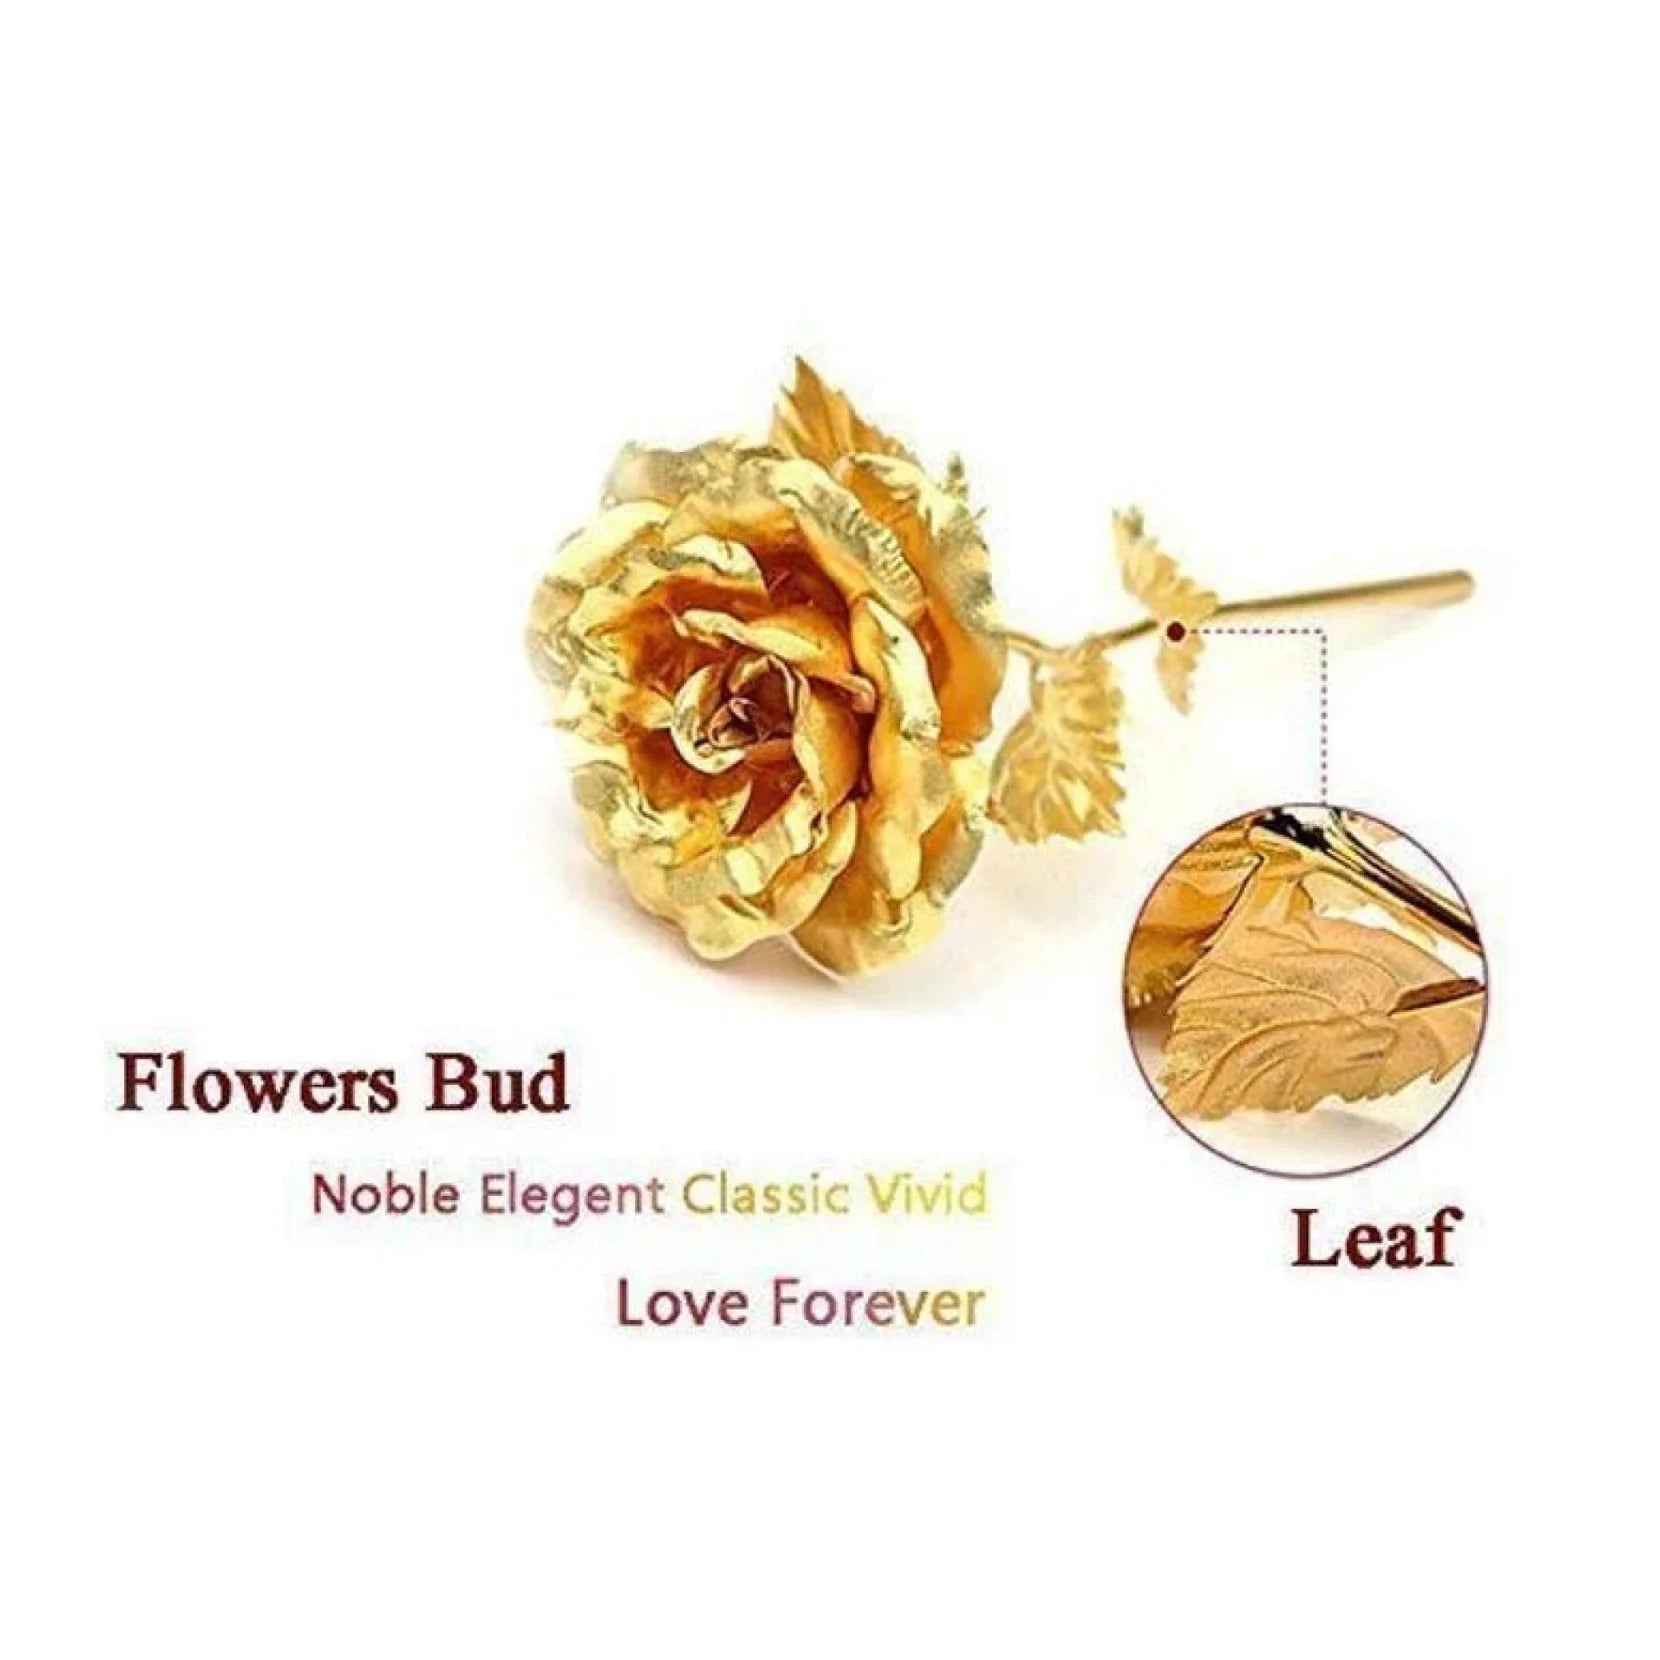 "Express the unsaid and show your love by gifting the marvelous golden plated roses.  "